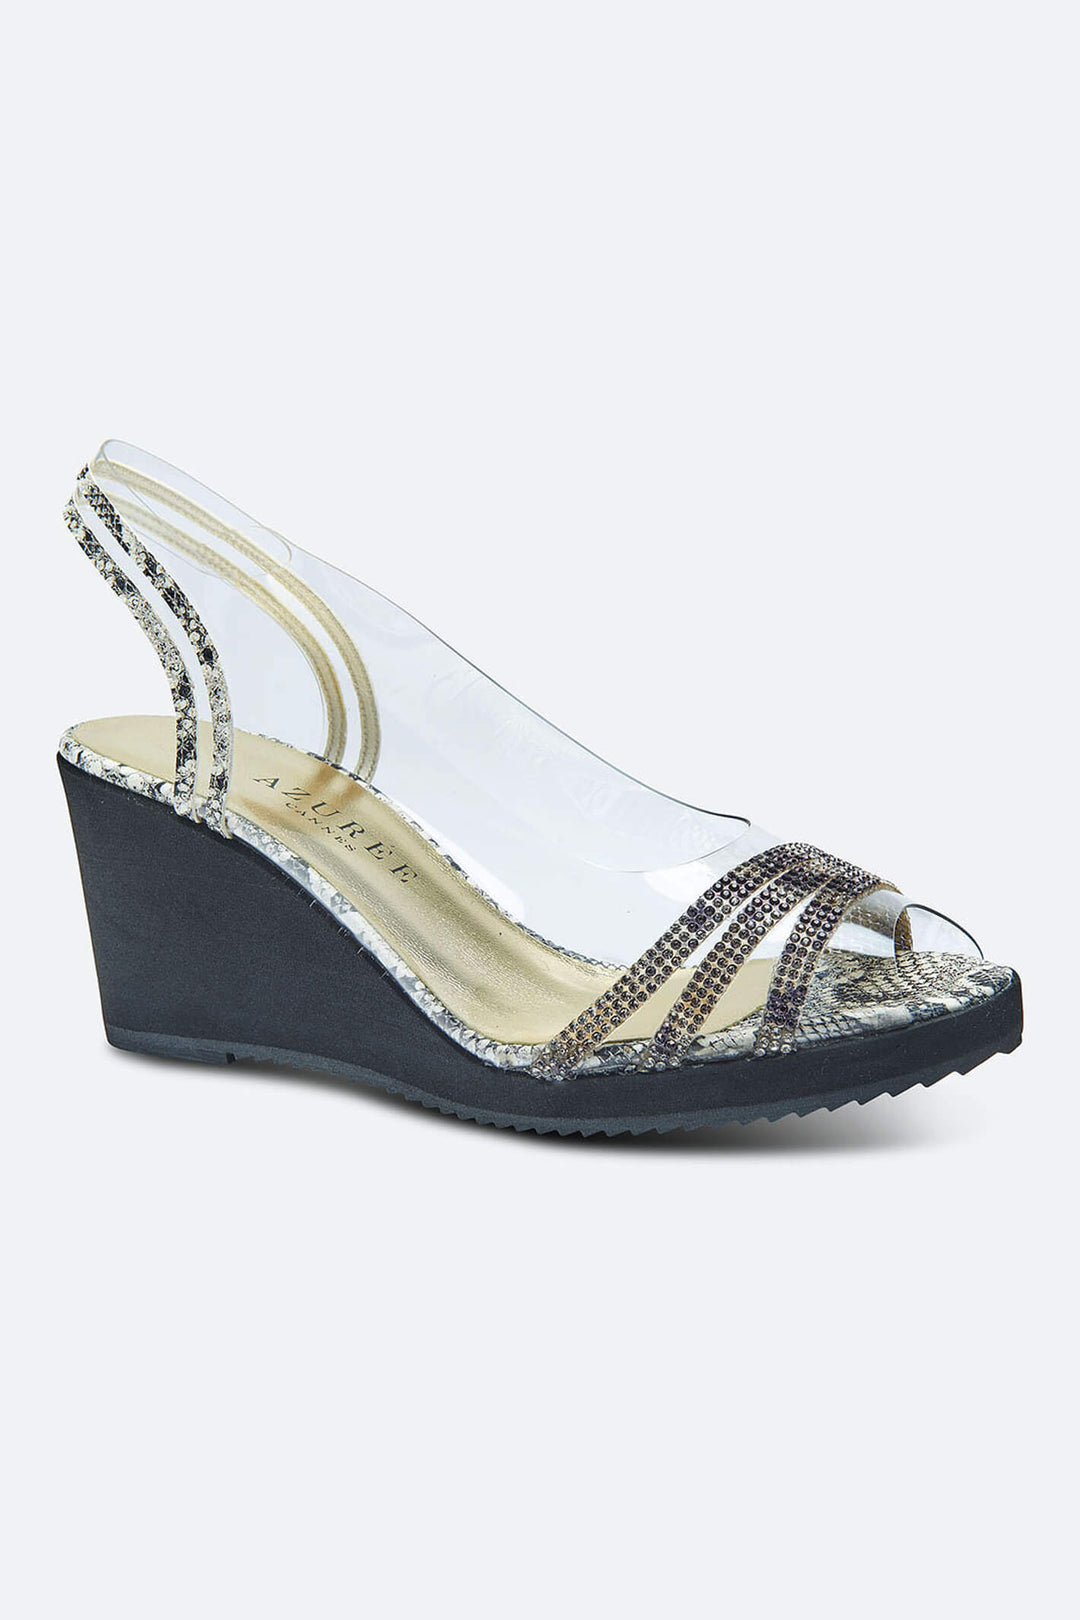 Azuree Madir 8A Grey Snake Print Shoes - Experience Boutique